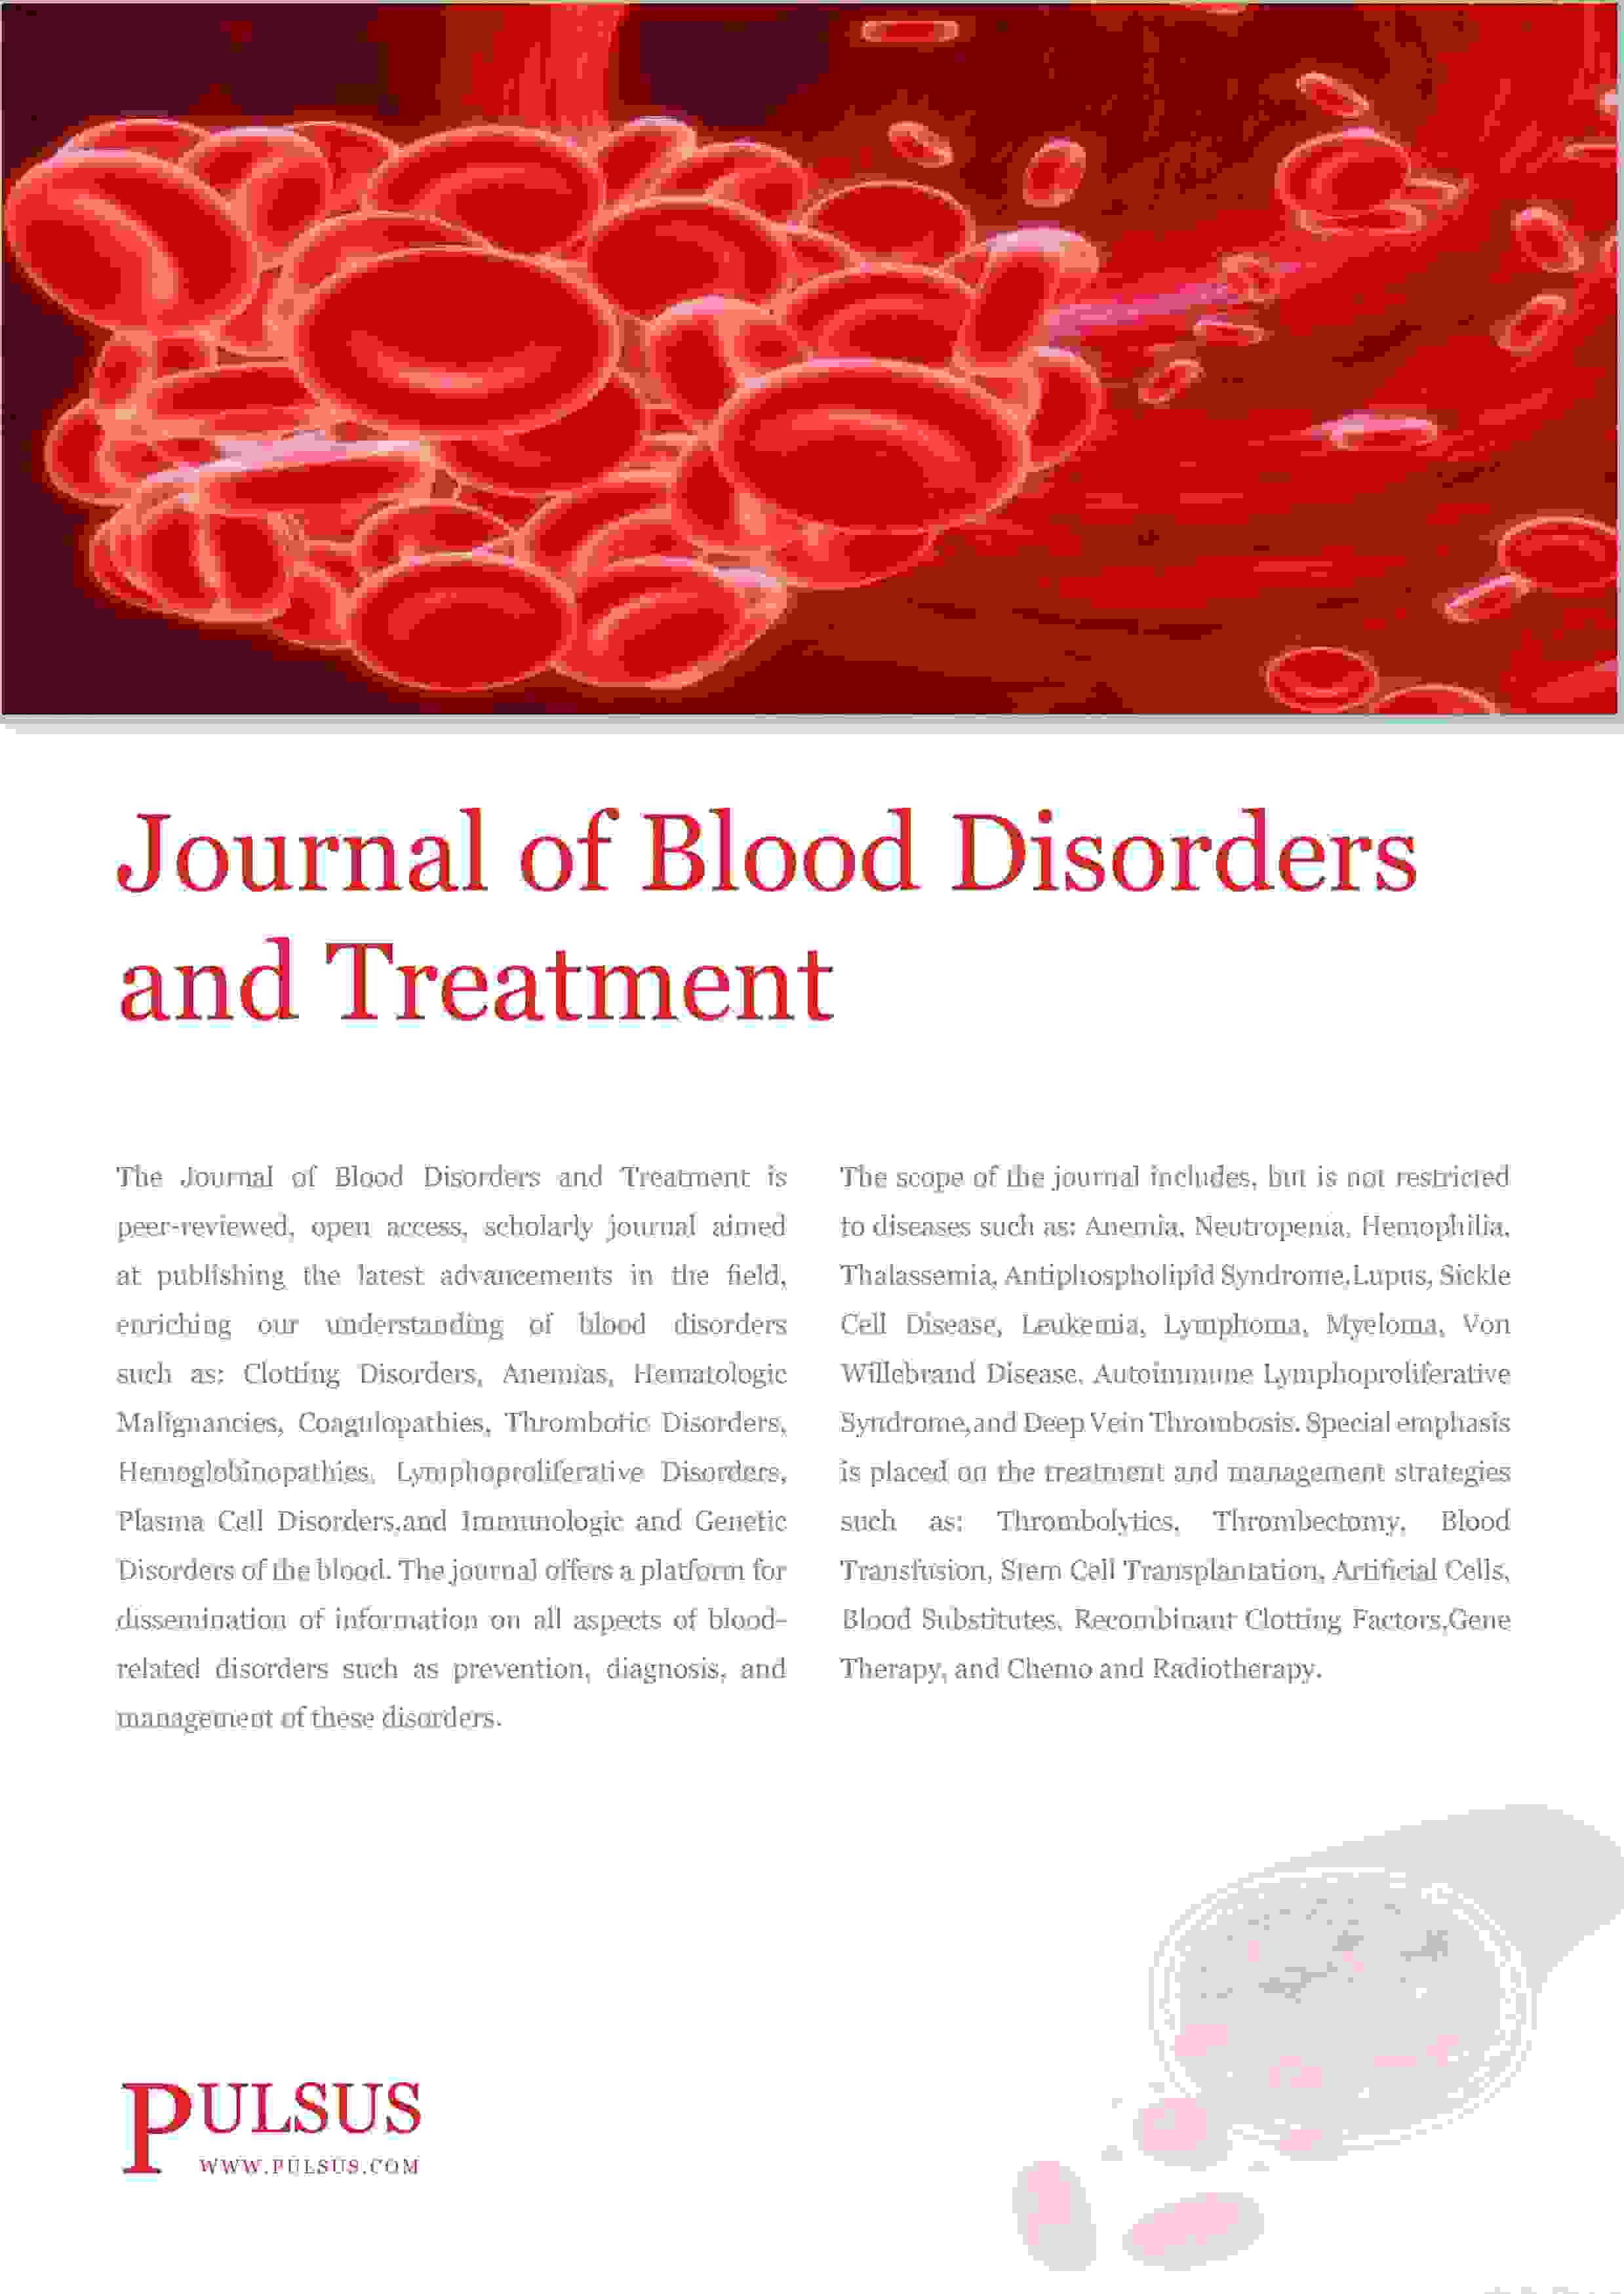 The Journal of Blood Disorders and Treatment